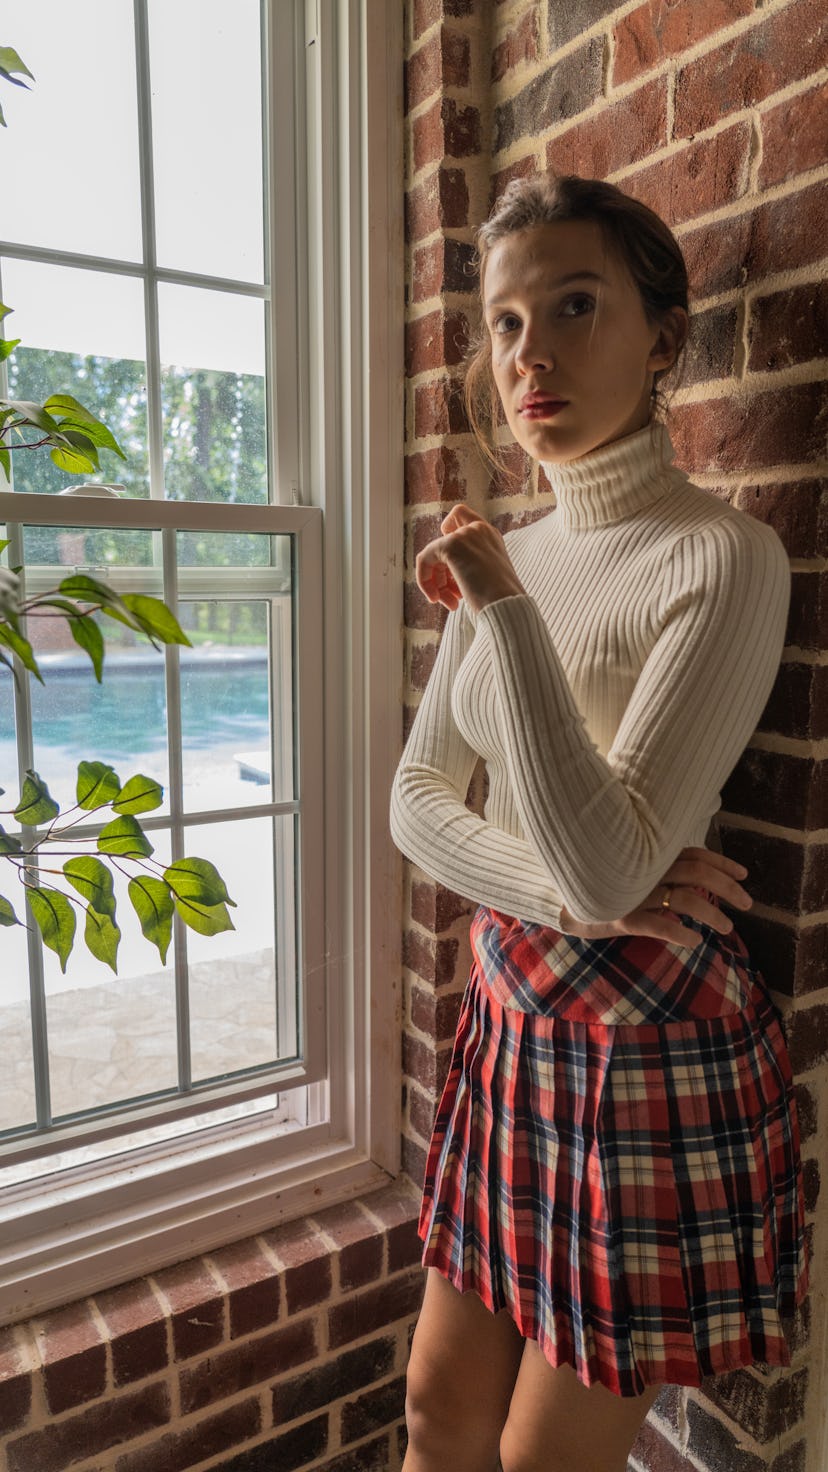 Millie Bobby Brown dressed as Rachel from Friends in a white turtleneck and plaid skirt